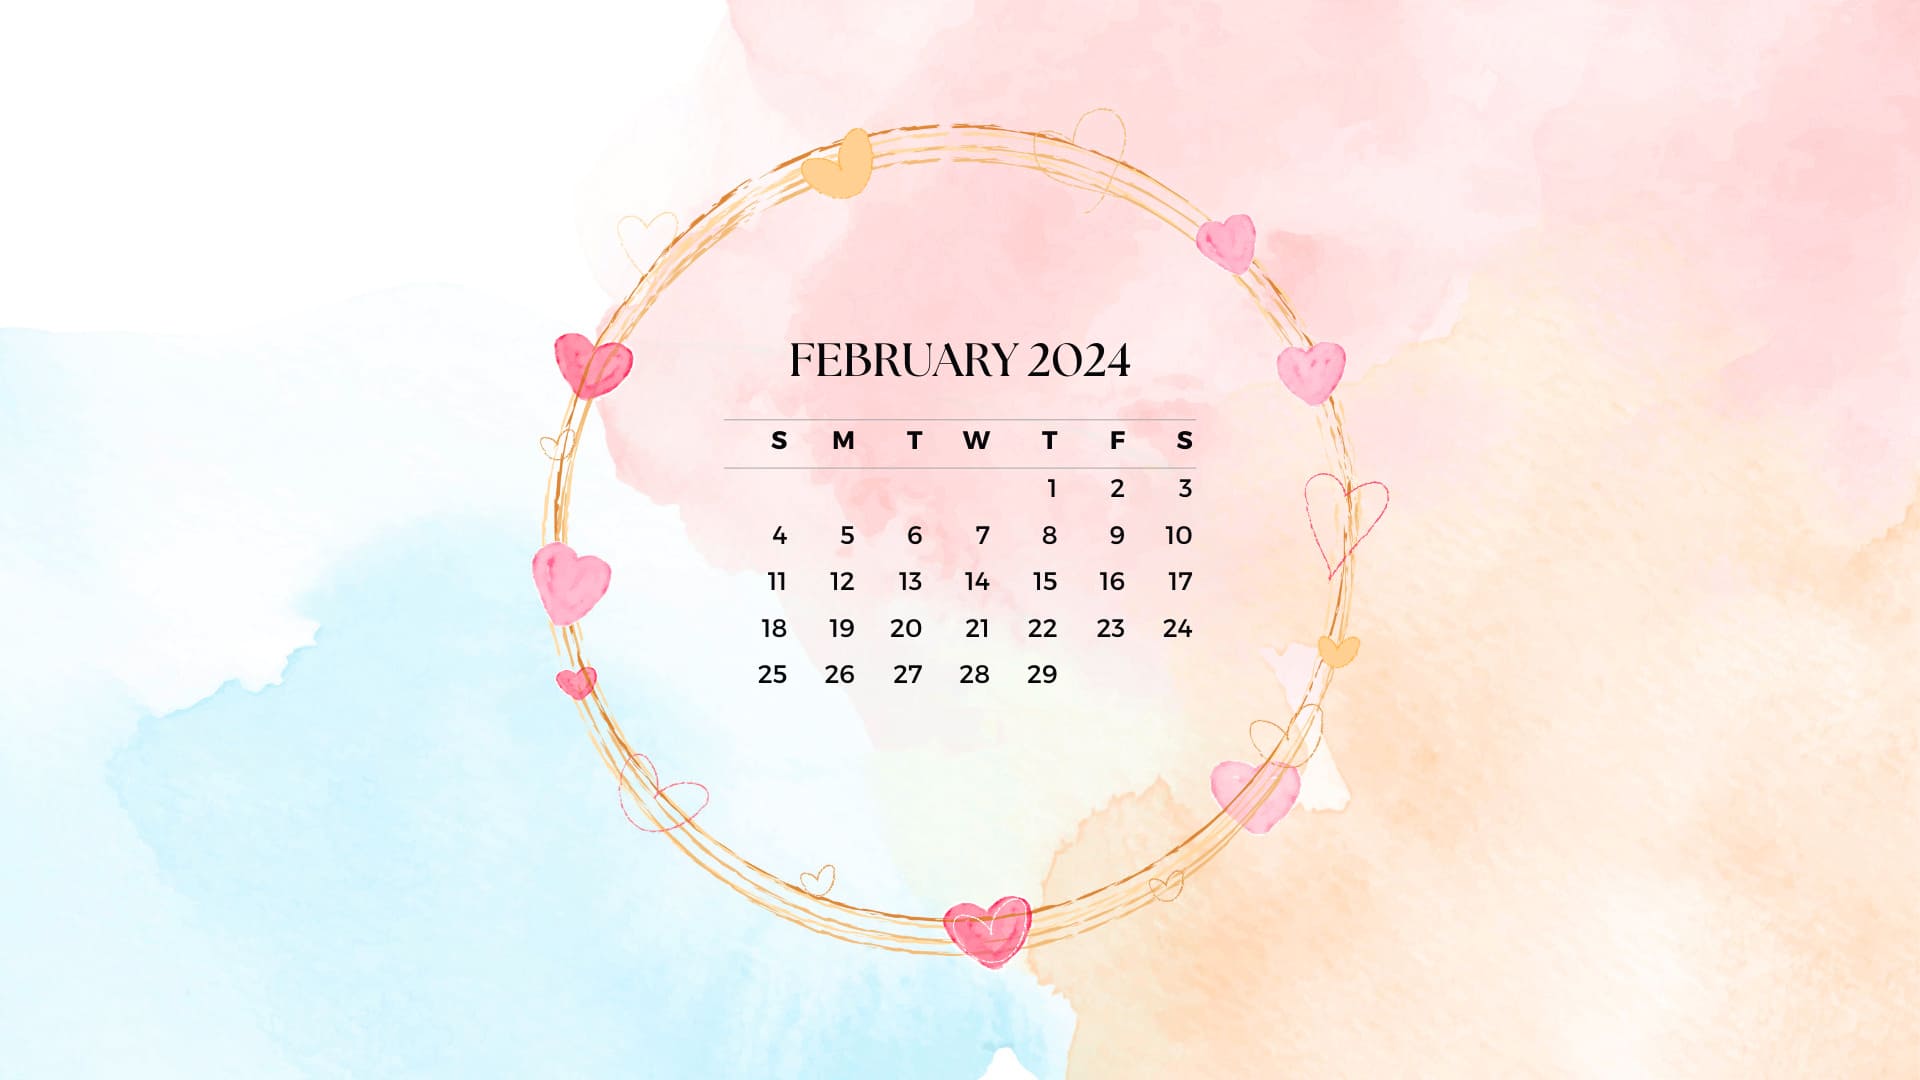 February 2024 Wallpapers